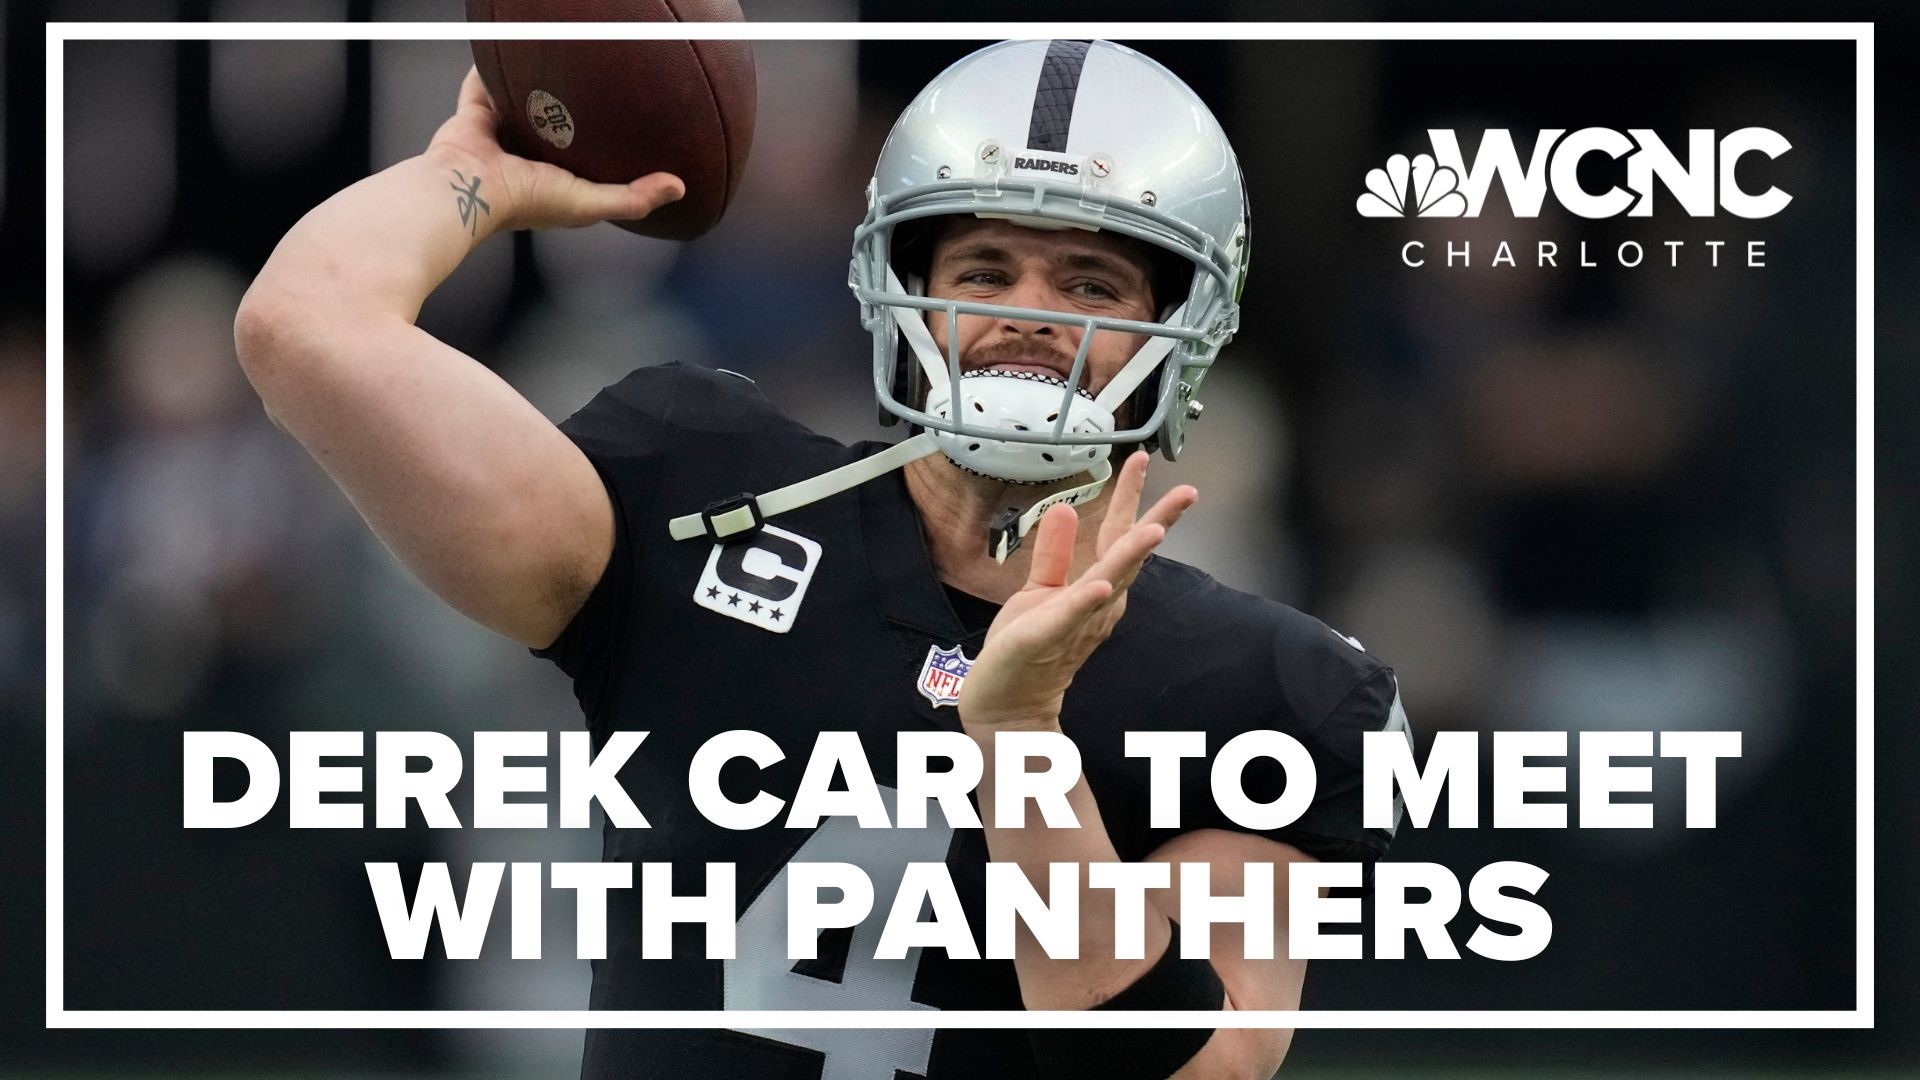 Veteran free agent Derek Carr will meet with the Carolina Panthers at the NFL combine as the team searches for its next quarterback.